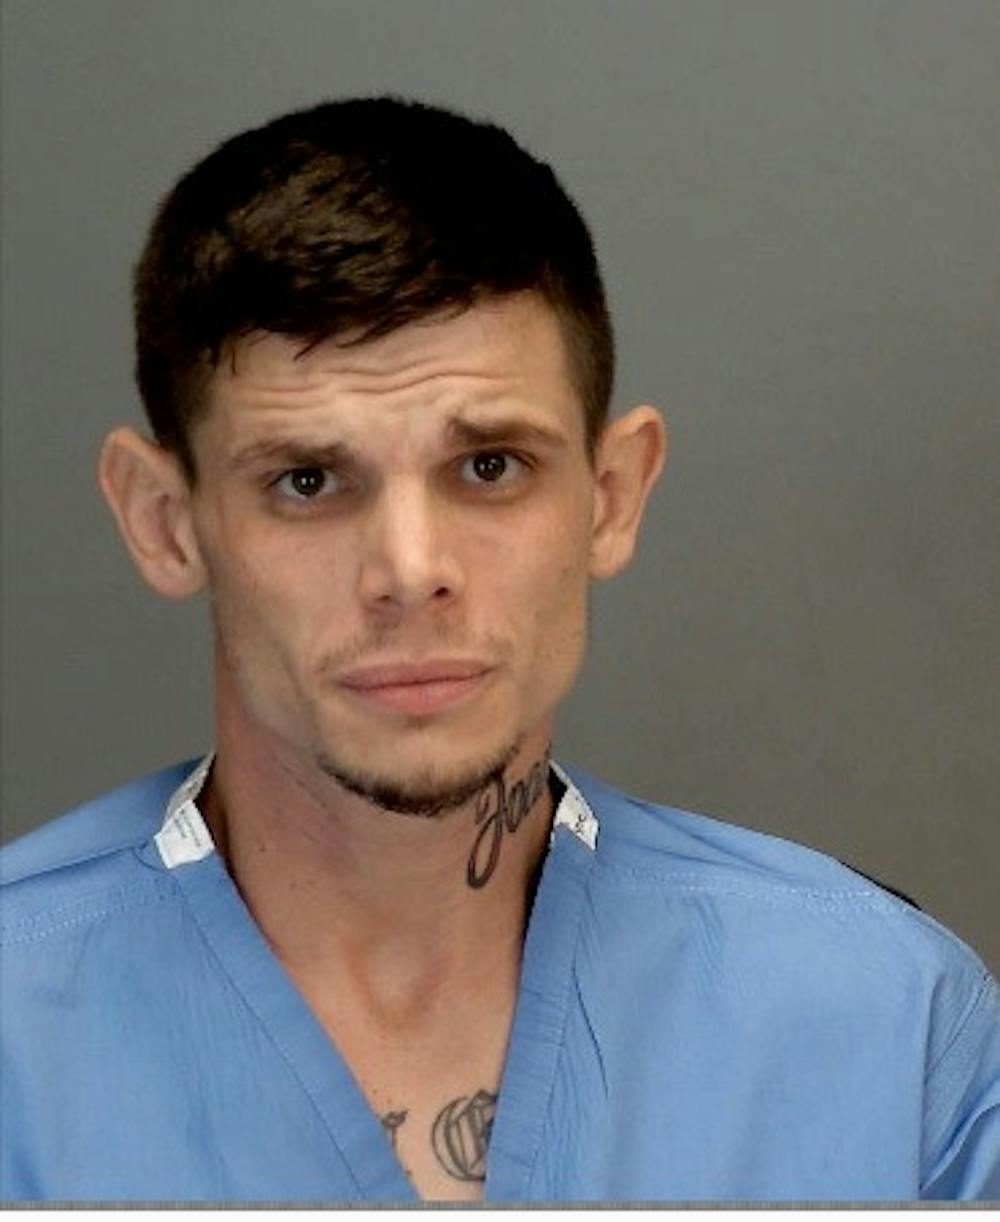 <p>Michael McKerchie, who escaped Ingham County Jail on Nov. 13, 2020 and was caught a week later on Nov. 21. Photo provided by Ingham County.</p>